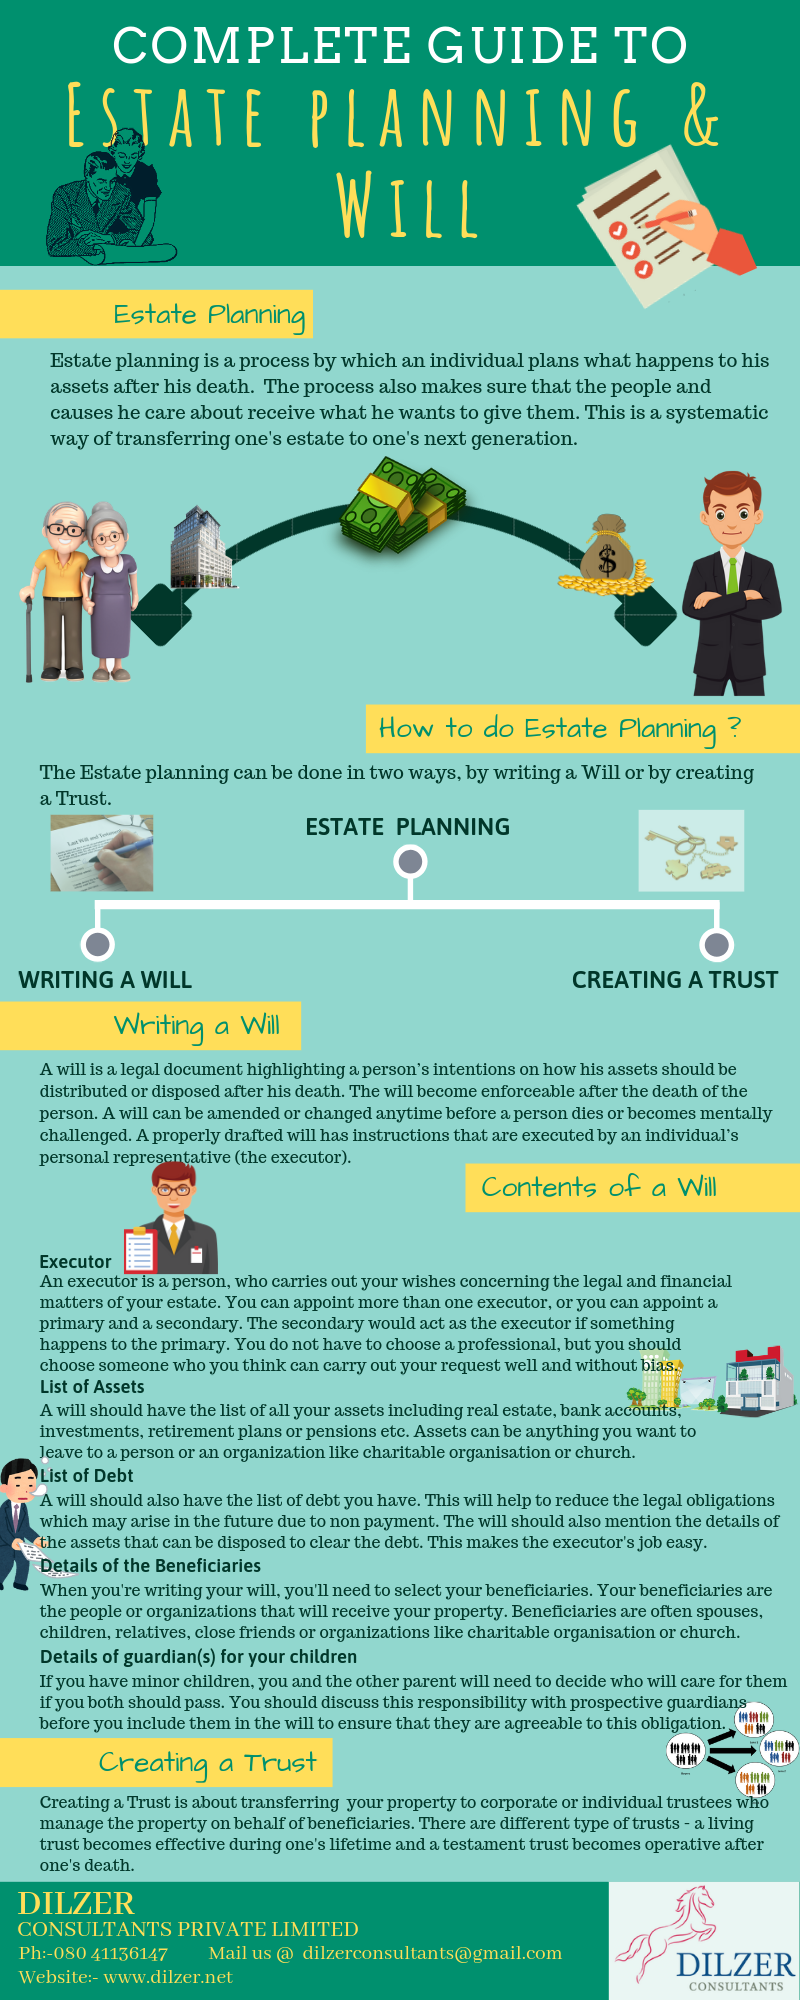 Complete guide to Estate Planning and Will 